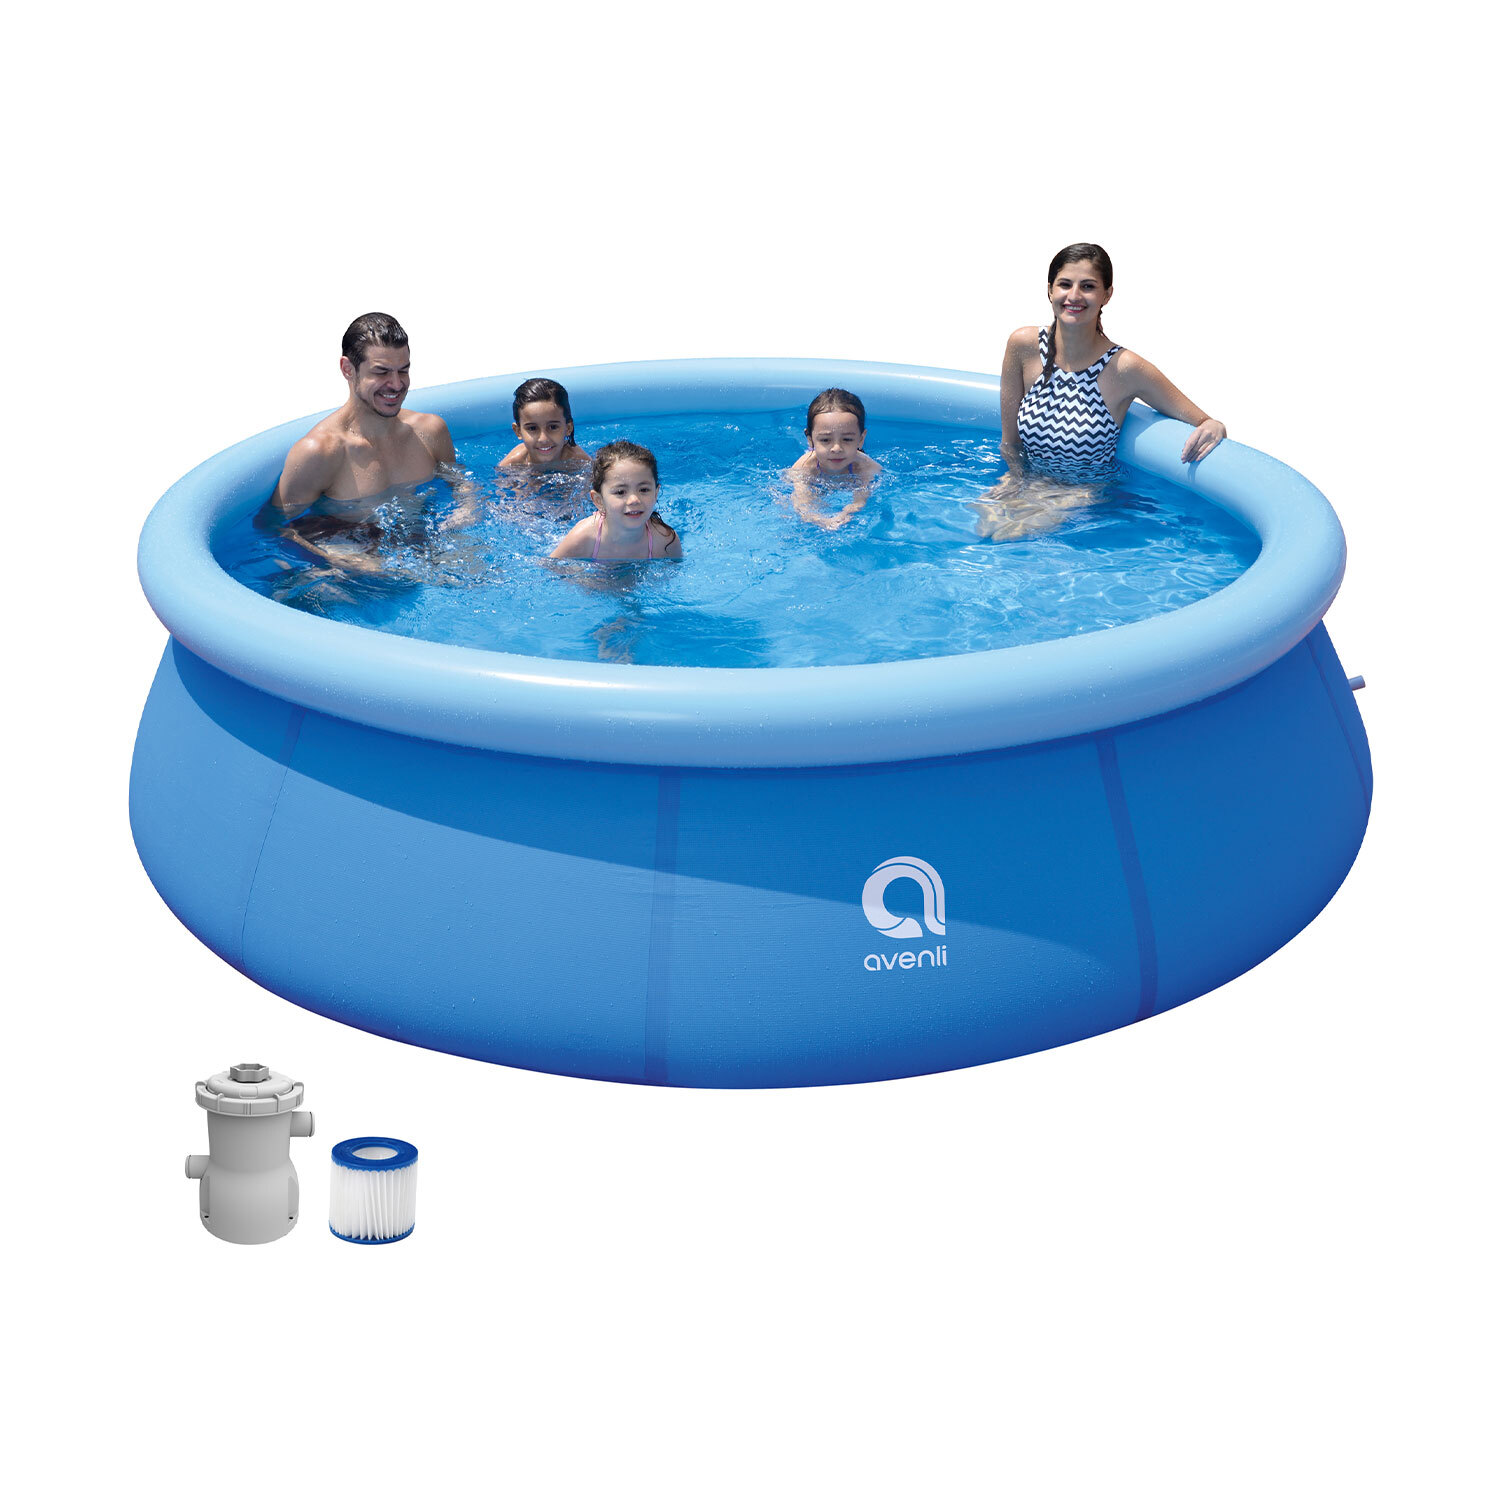 Avenli Prompt Pool Set with 300 Gallon Filter Pump Image